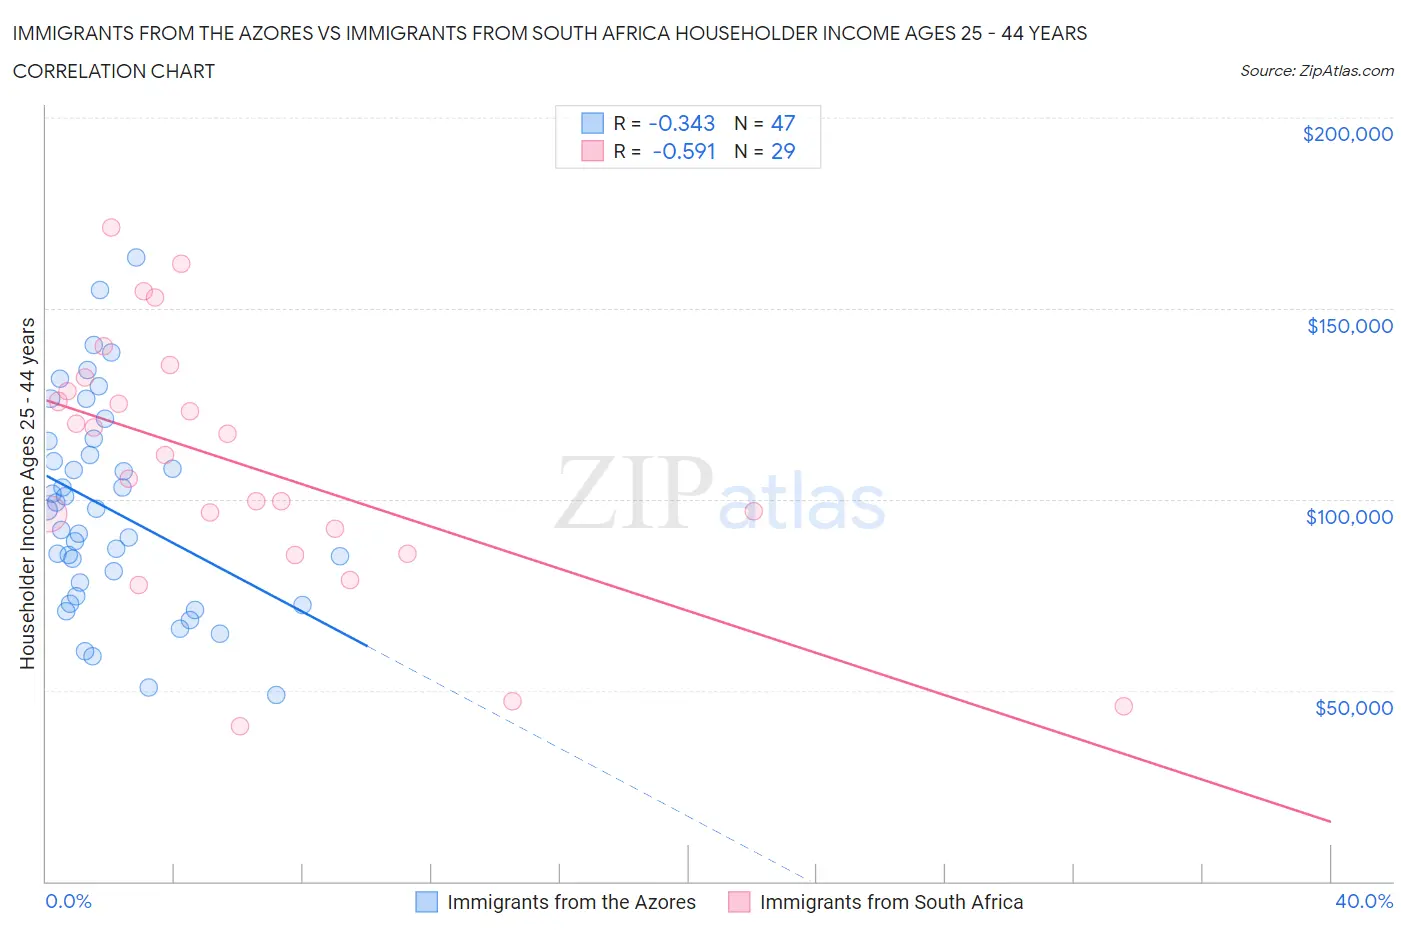 Immigrants from the Azores vs Immigrants from South Africa Householder Income Ages 25 - 44 years